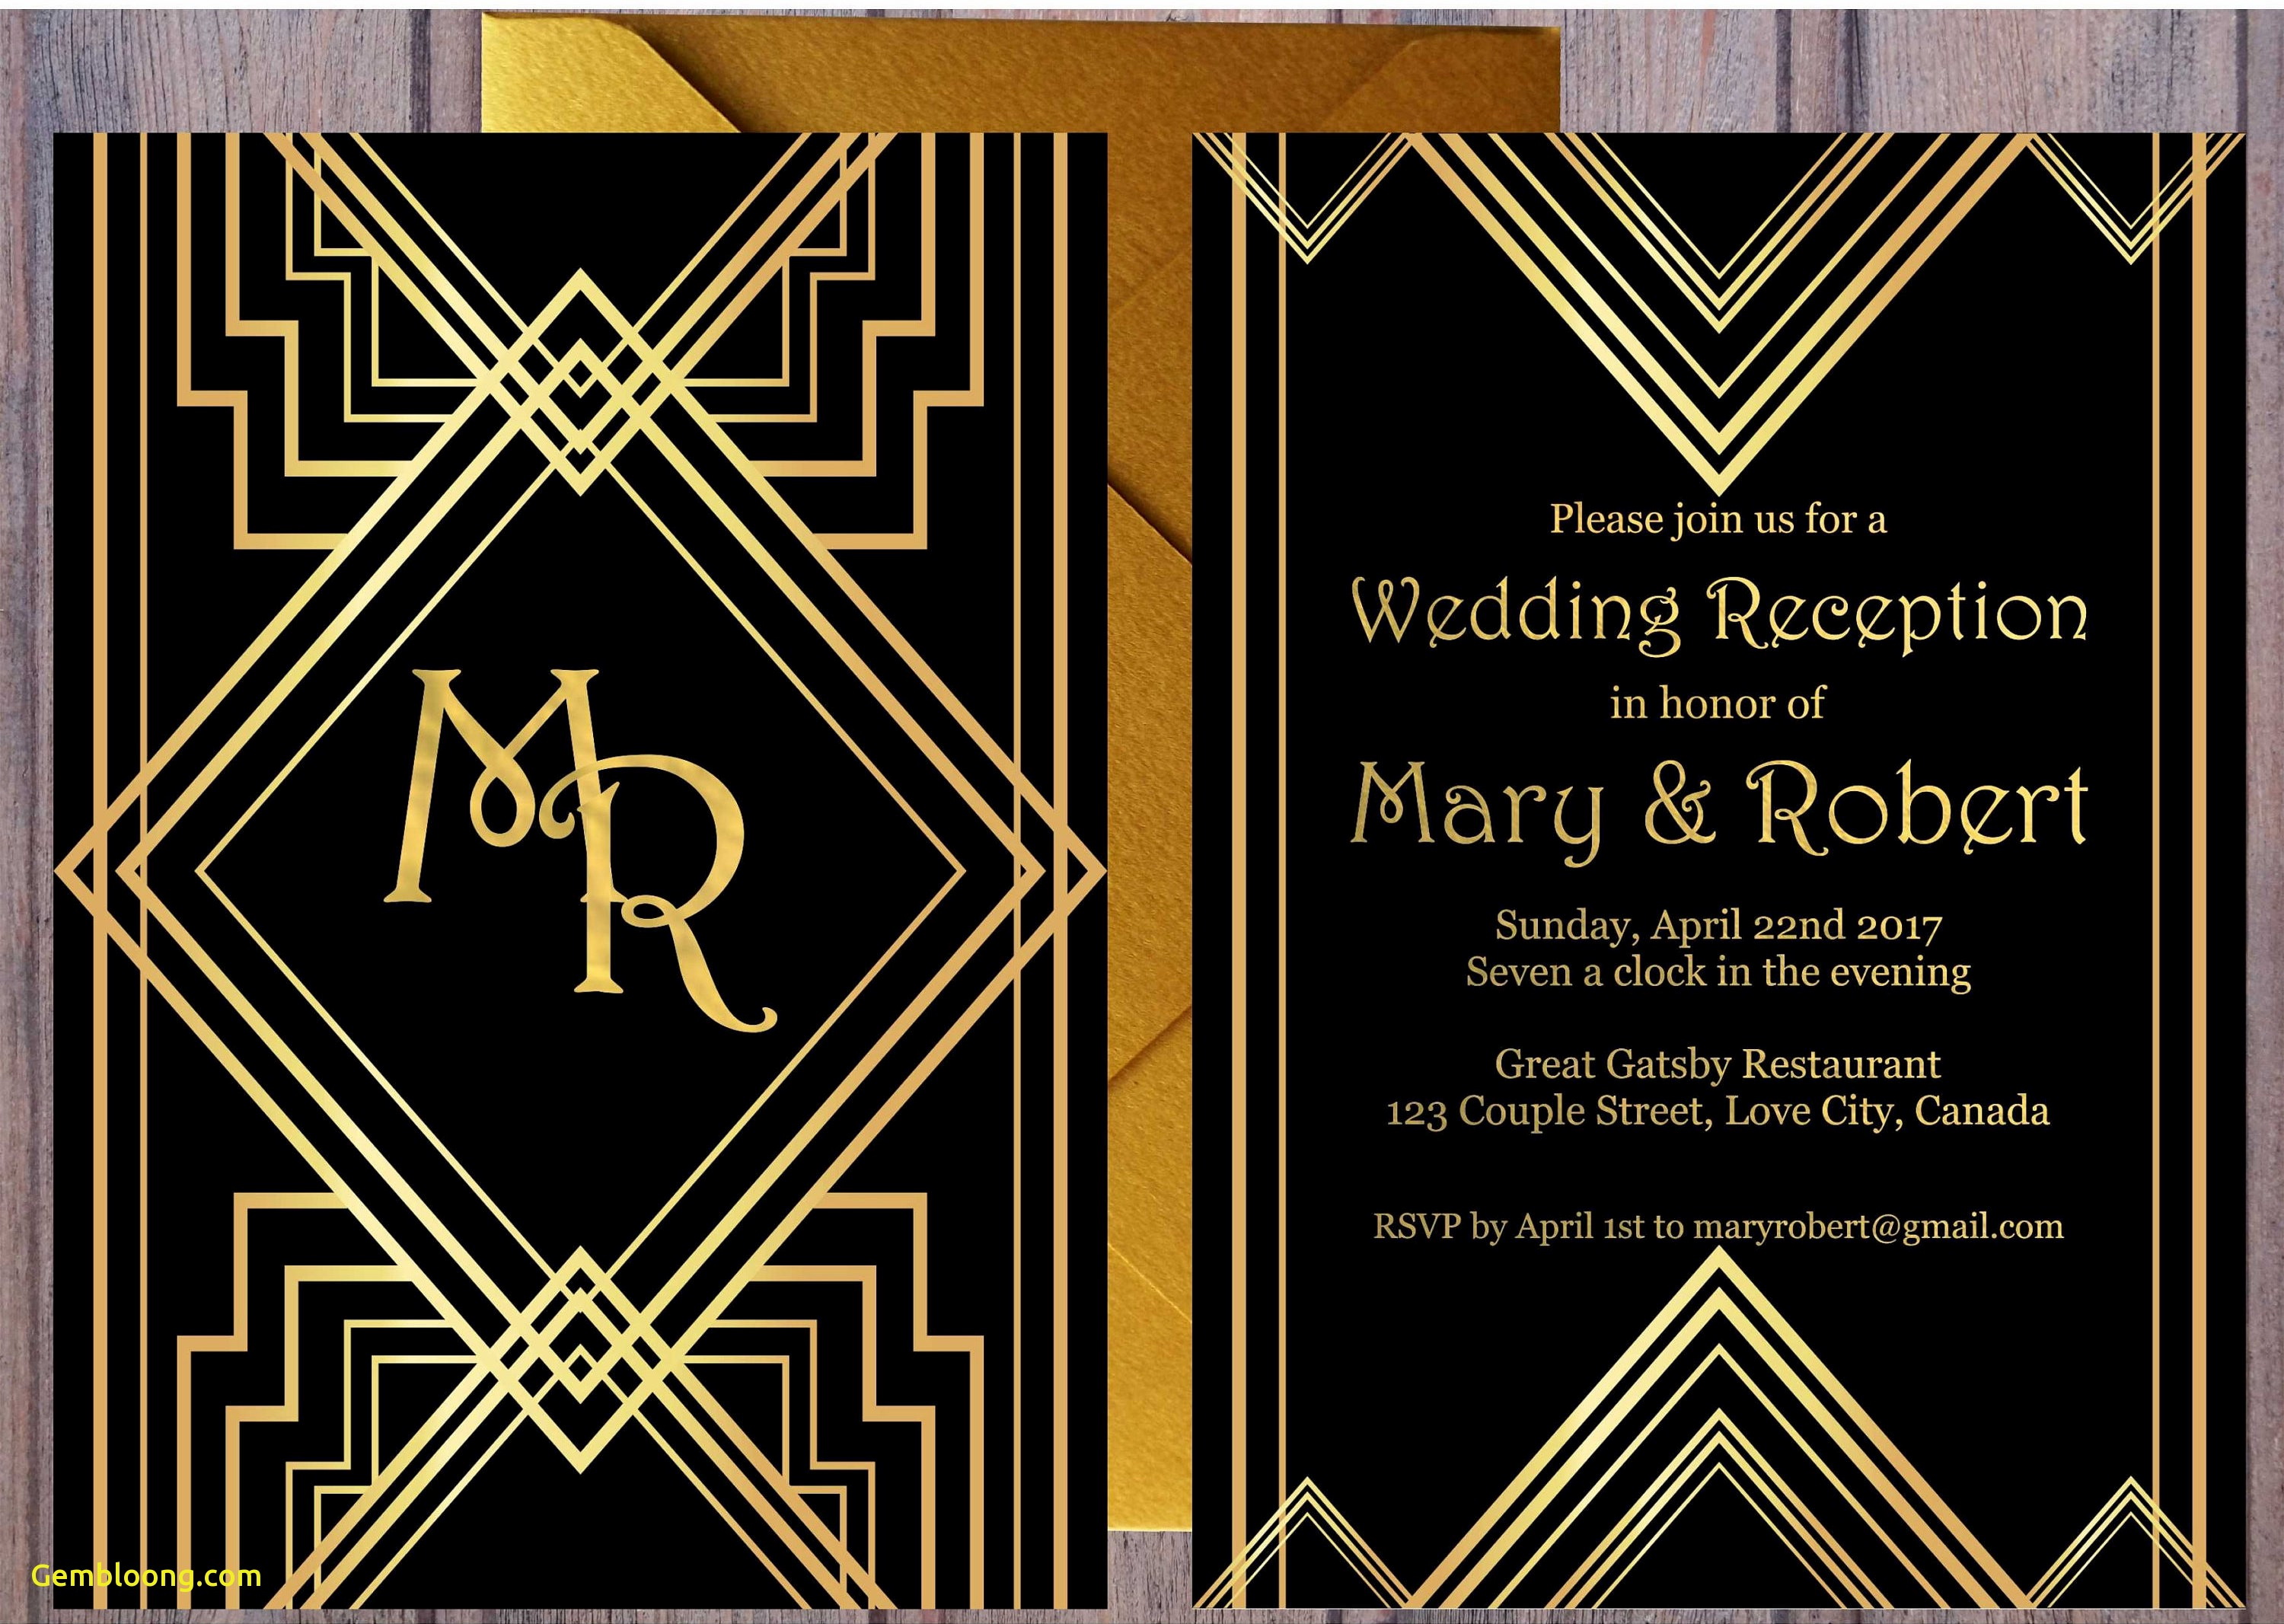 Great Gatsby Party Invitations Template Mryn Ism